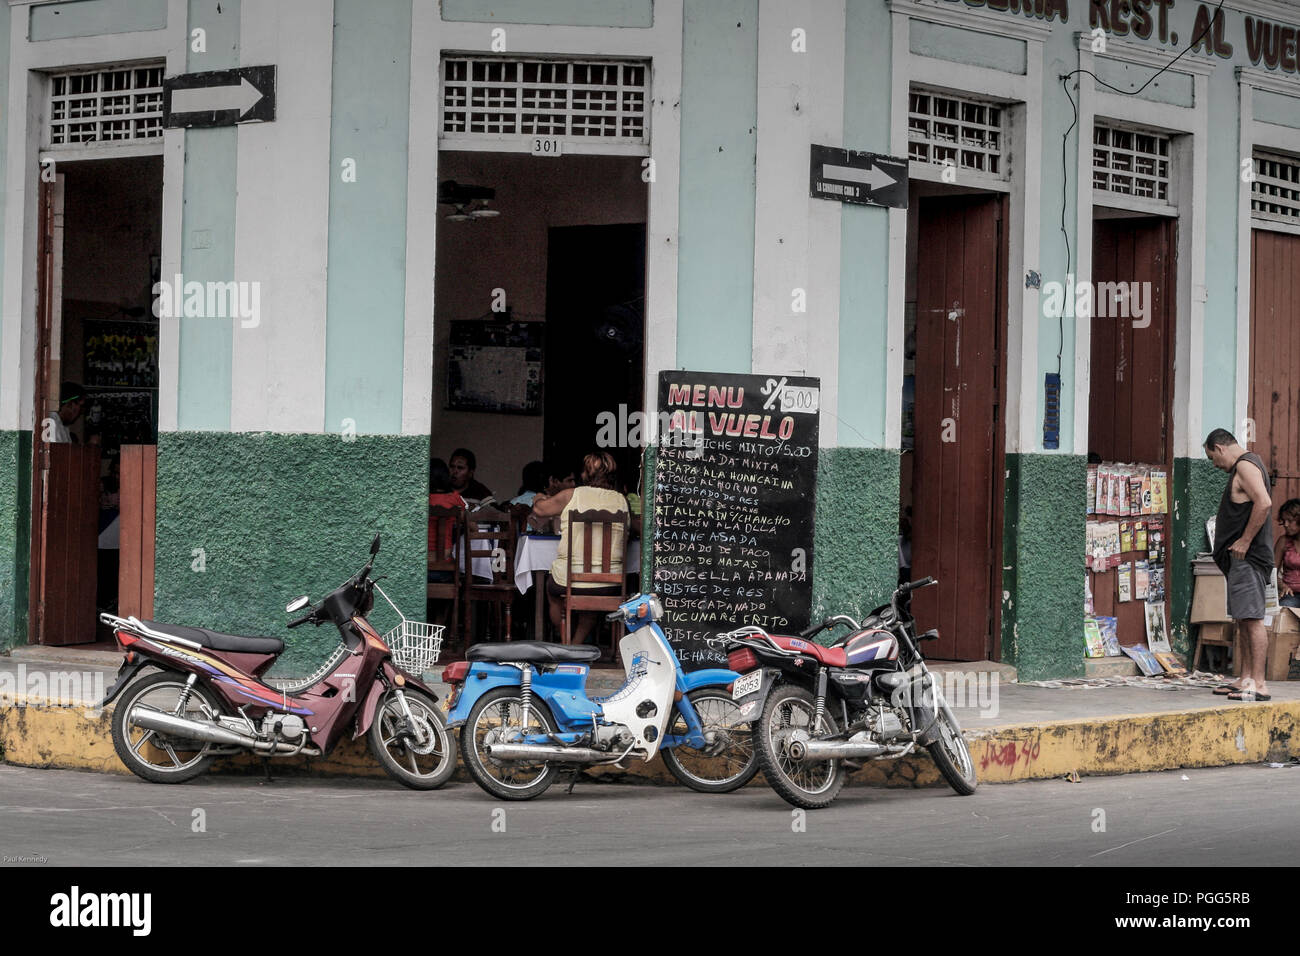 Motorcycle and motor scooters parked outside restaurant in Iquitos, Peru Stock Photo